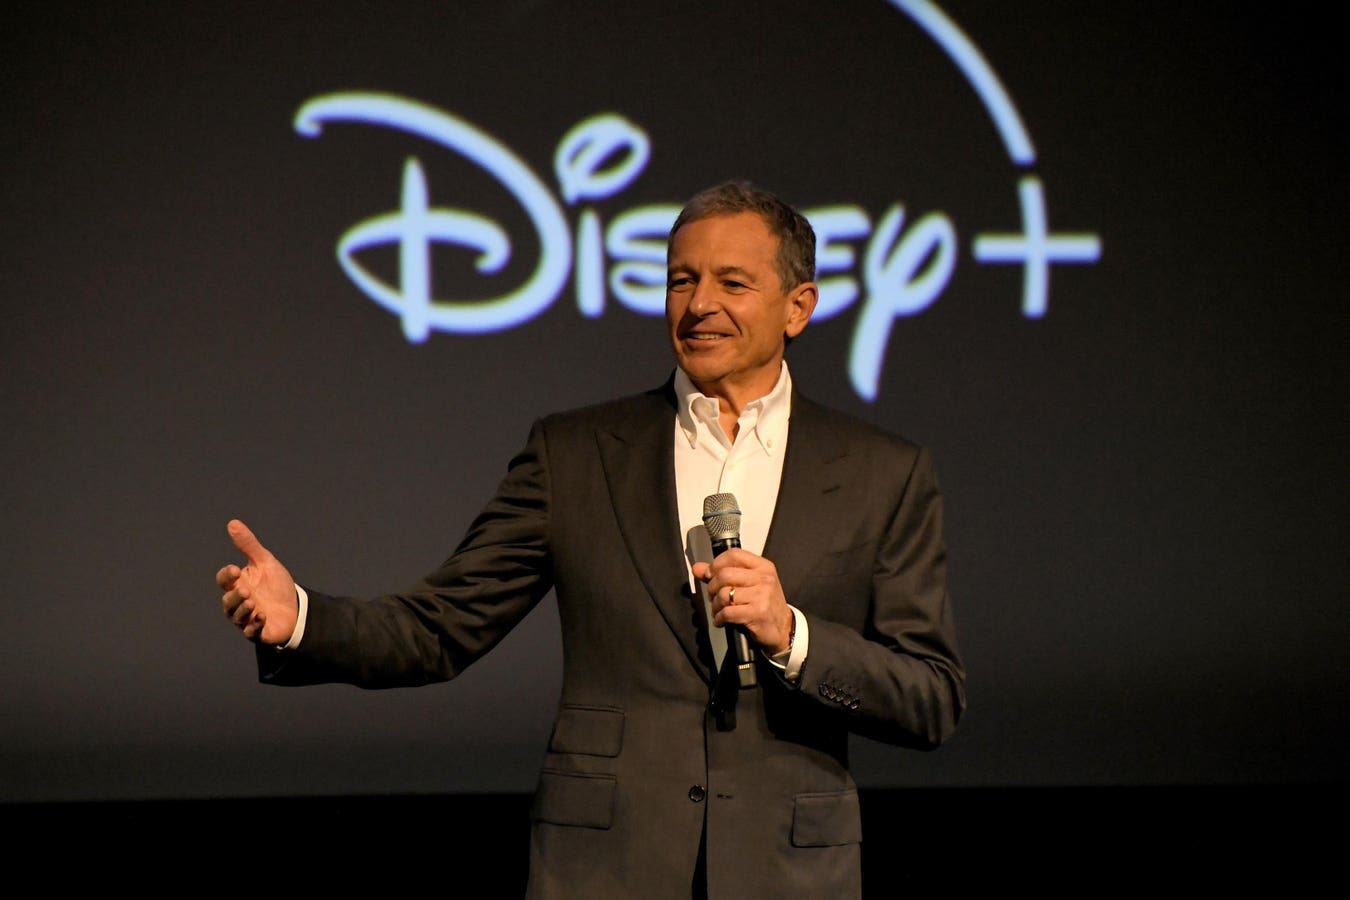 Disney Stock Faces Major Challenges: Is Iger The Right Choice?